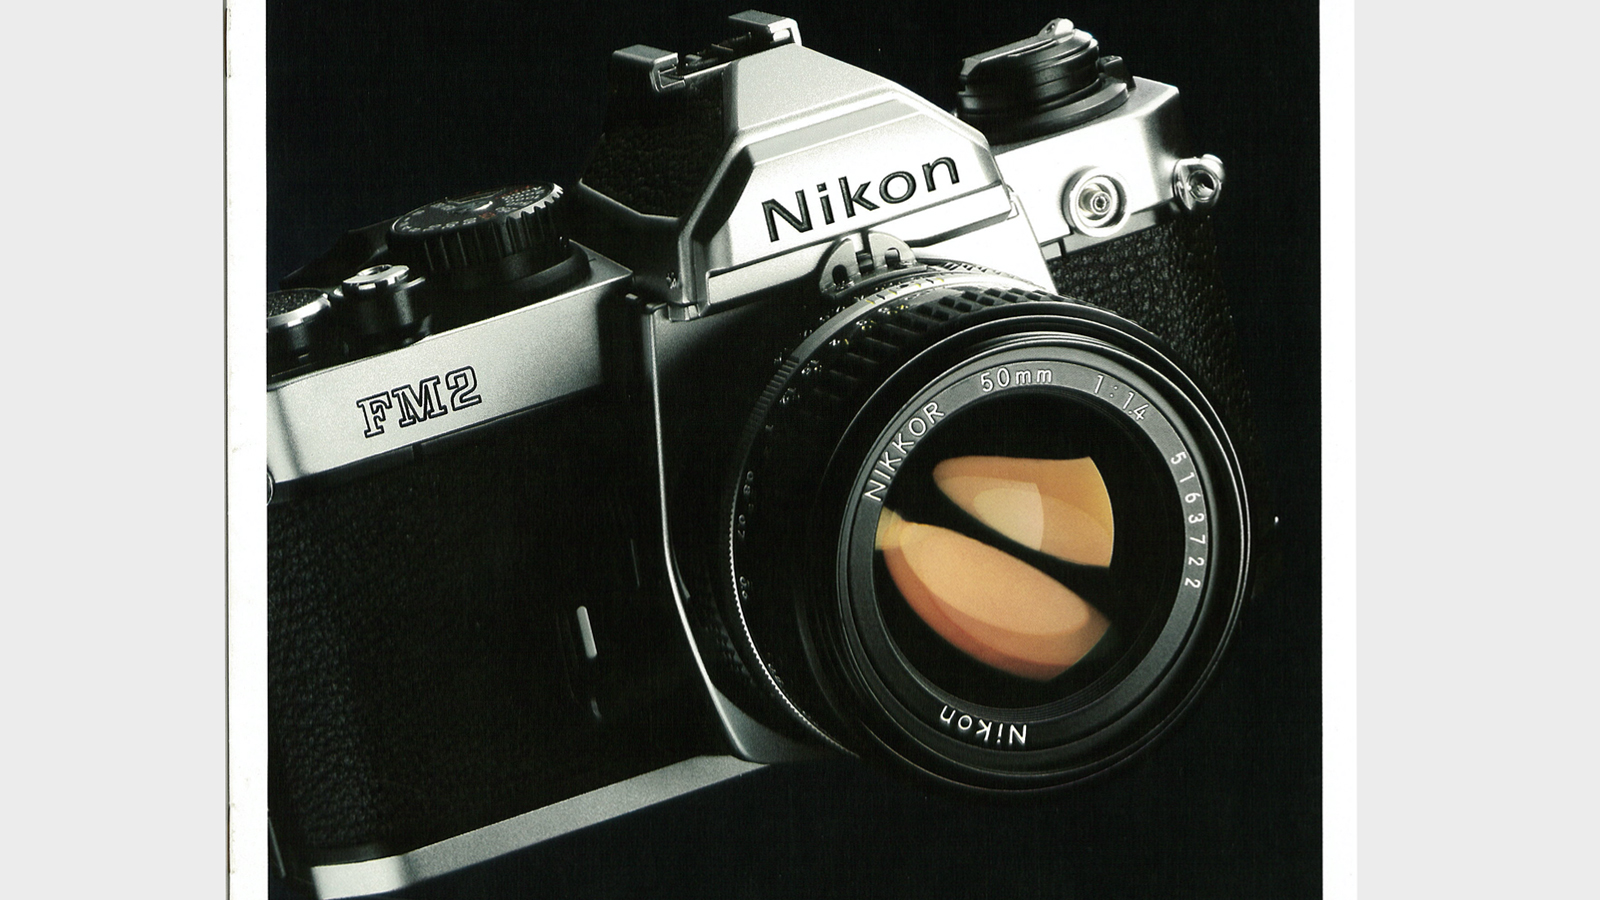 Nikon FM2 pictures in its manual